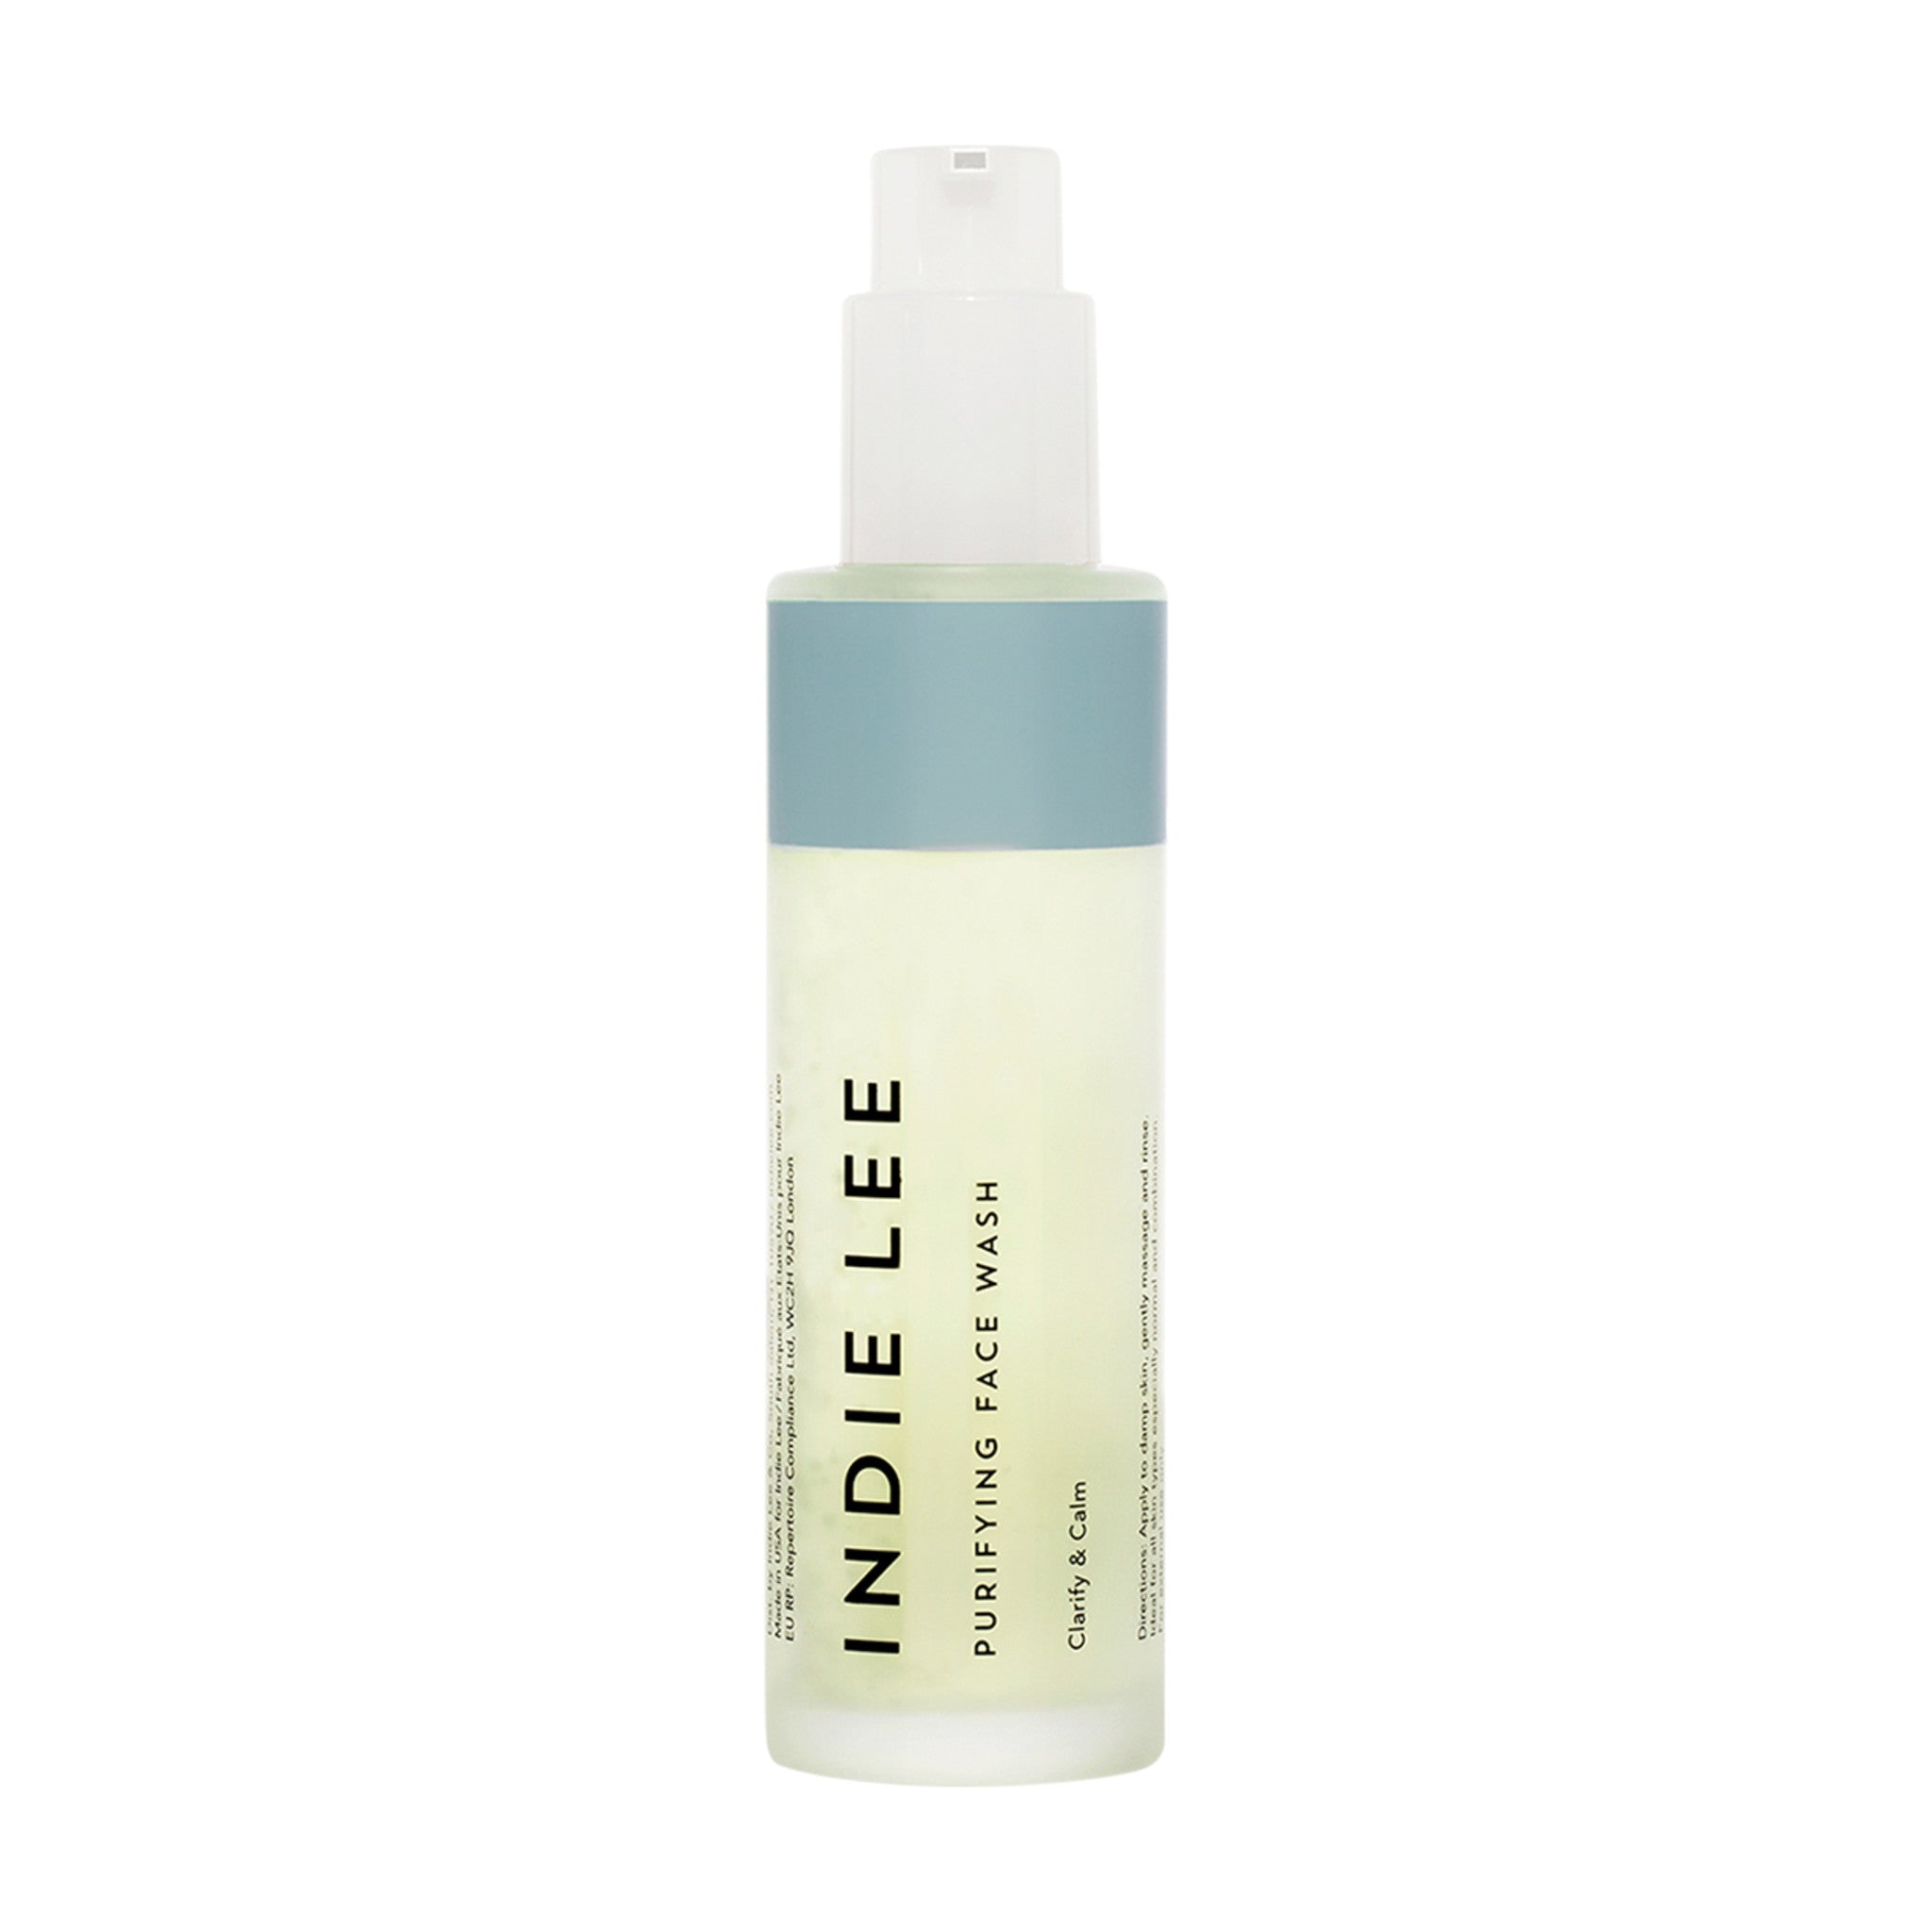 Indie Lee Purifying Face Wash Size variant: 4.2 oz. main image.